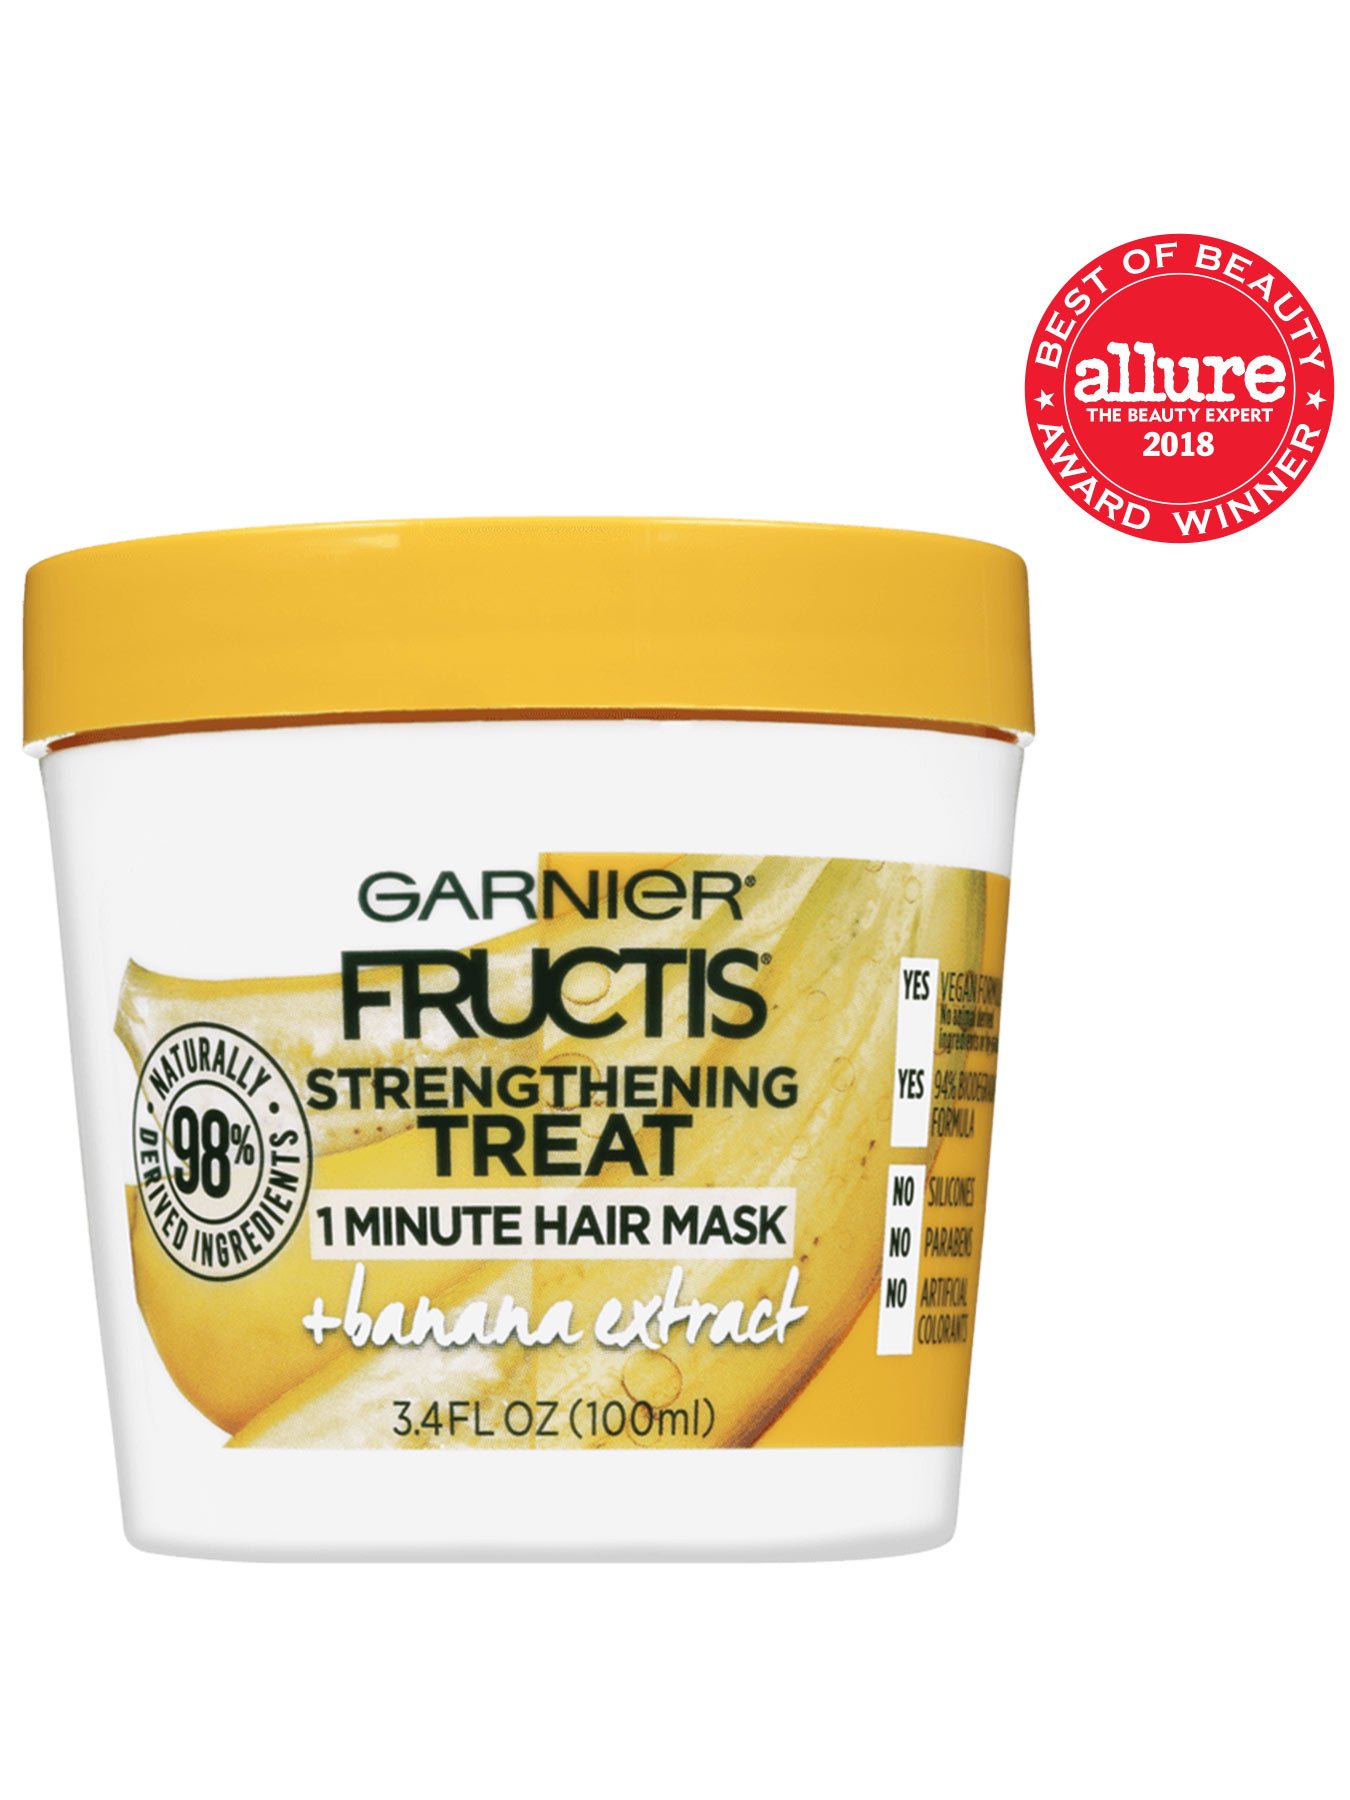 Front view of Garnier Fructis 1-Minute Hair Mask with Banana Extract with the Allure Best of Beauty Award badge.